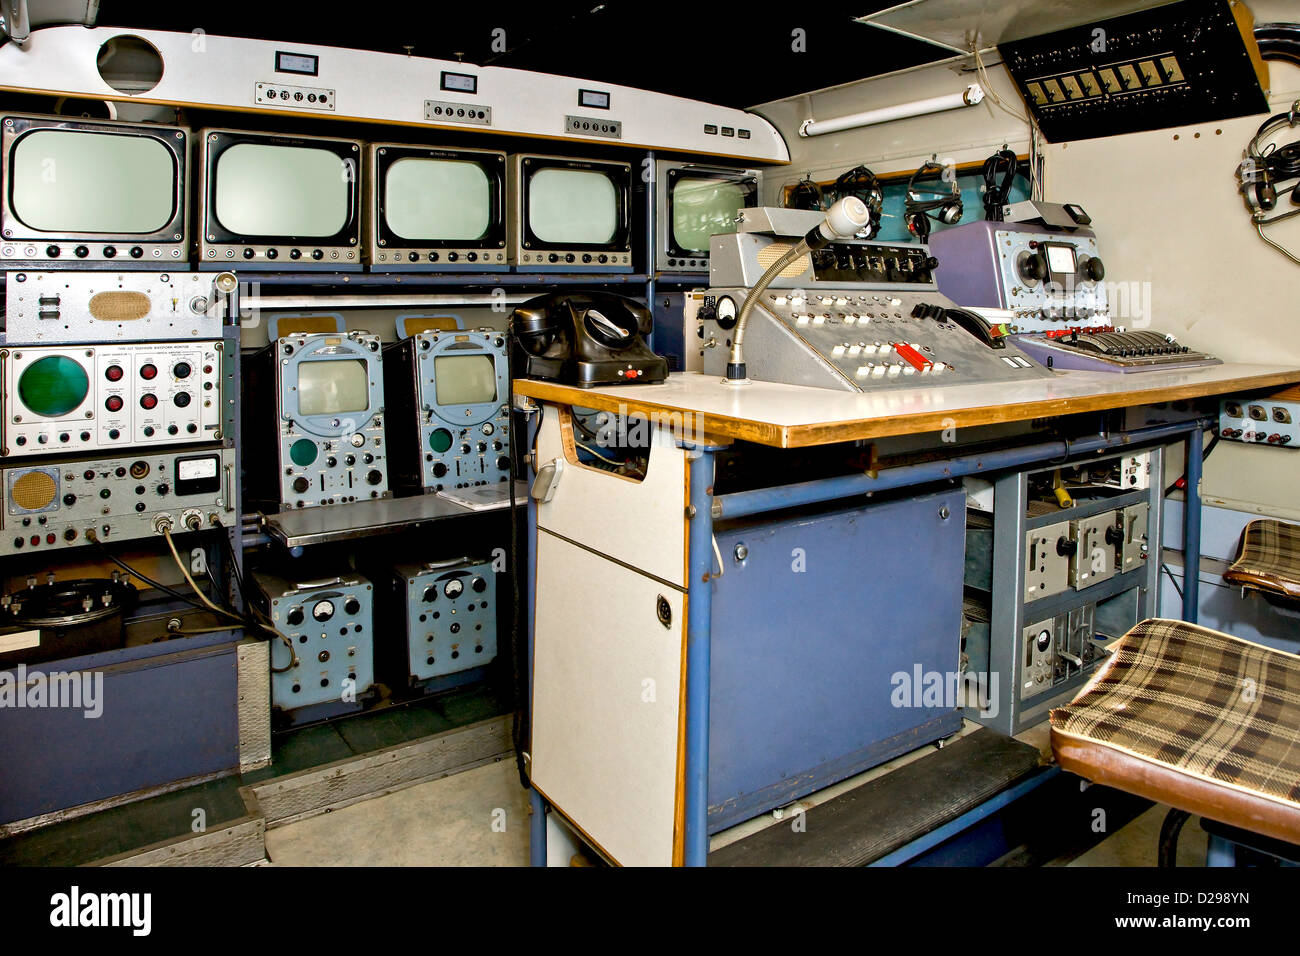 Inside an old broadcast truck from Stock Photo